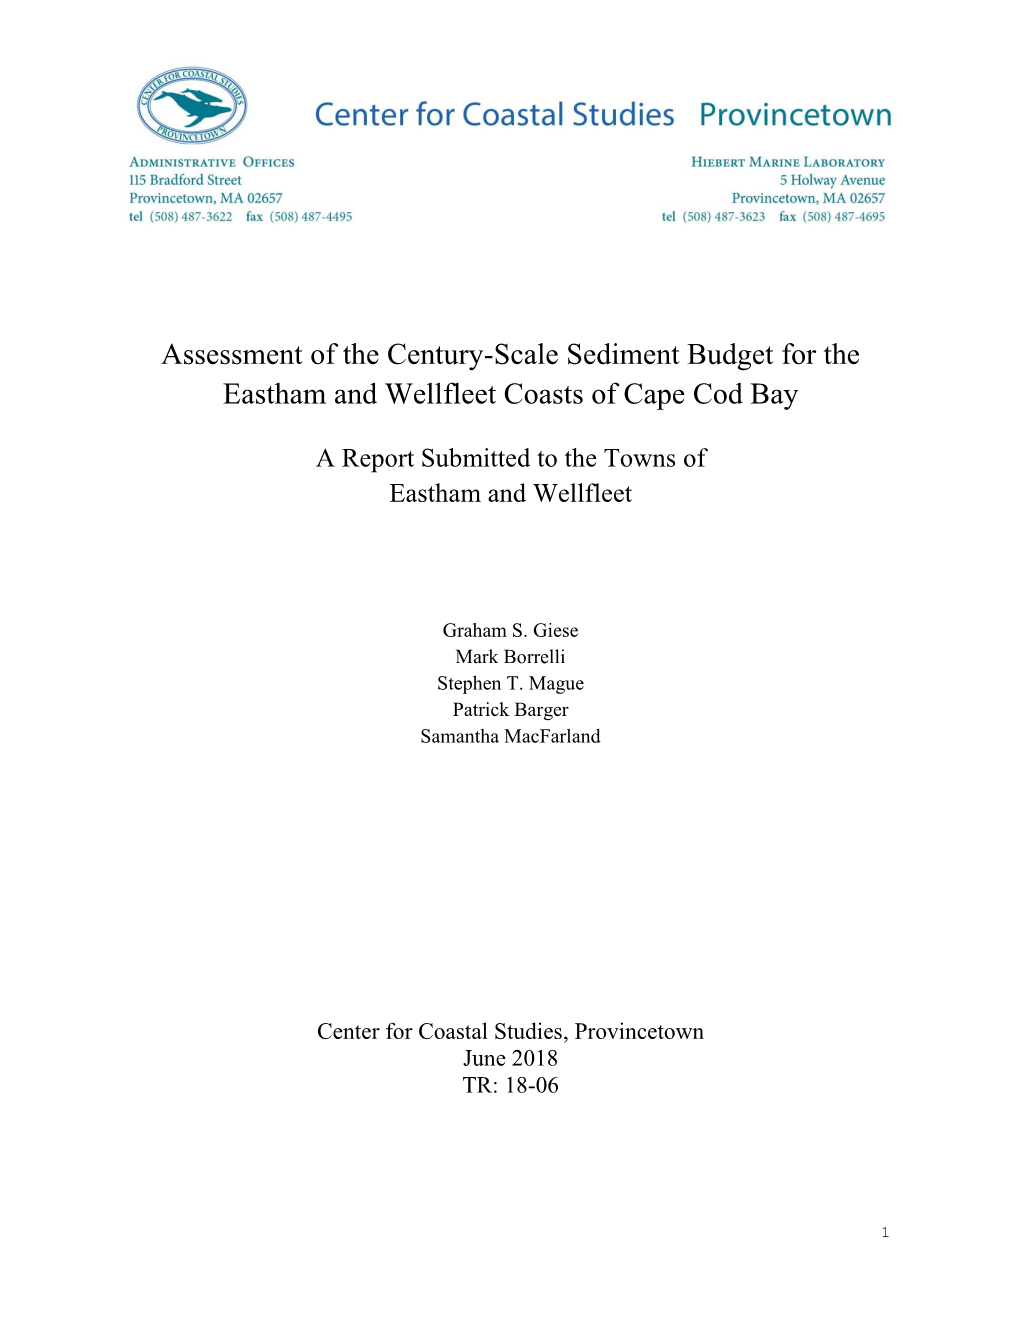 Assessment of the Century-Scale Sediment Budget for the Eastham and Wellfleet Coasts of Cape Cod Bay